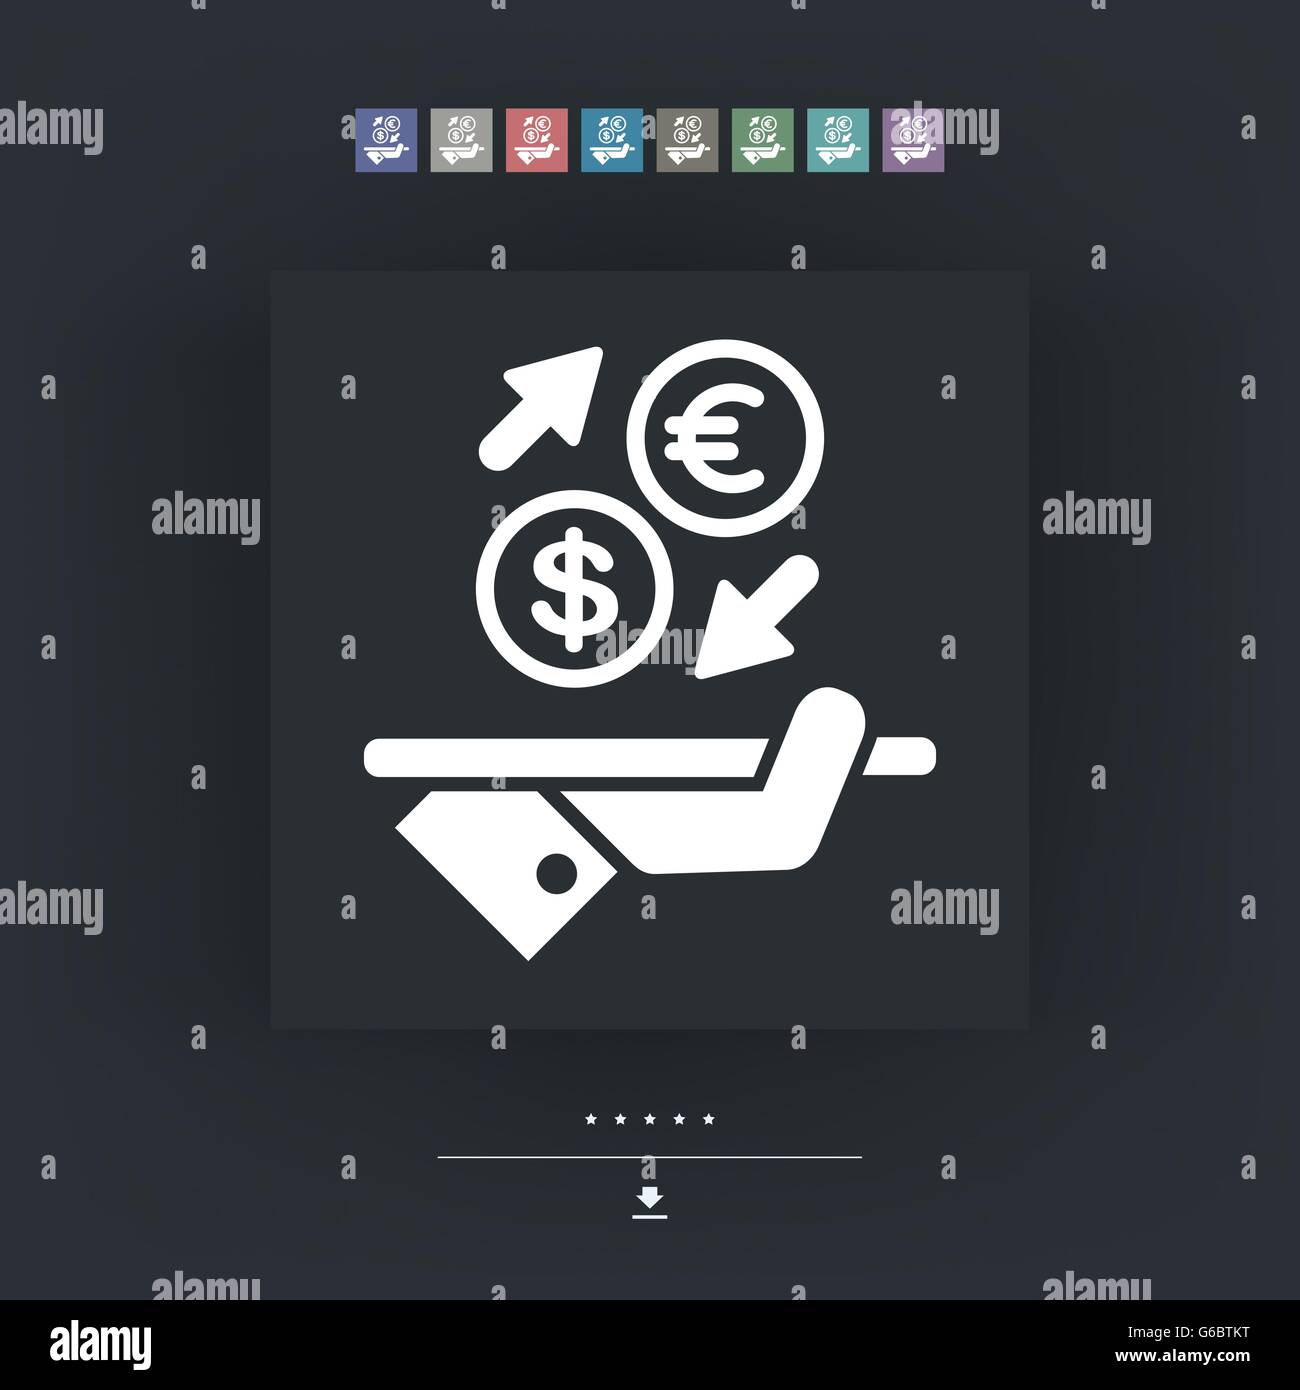 Euro/Dollar - Foreign currency exchange icon Stock Vector